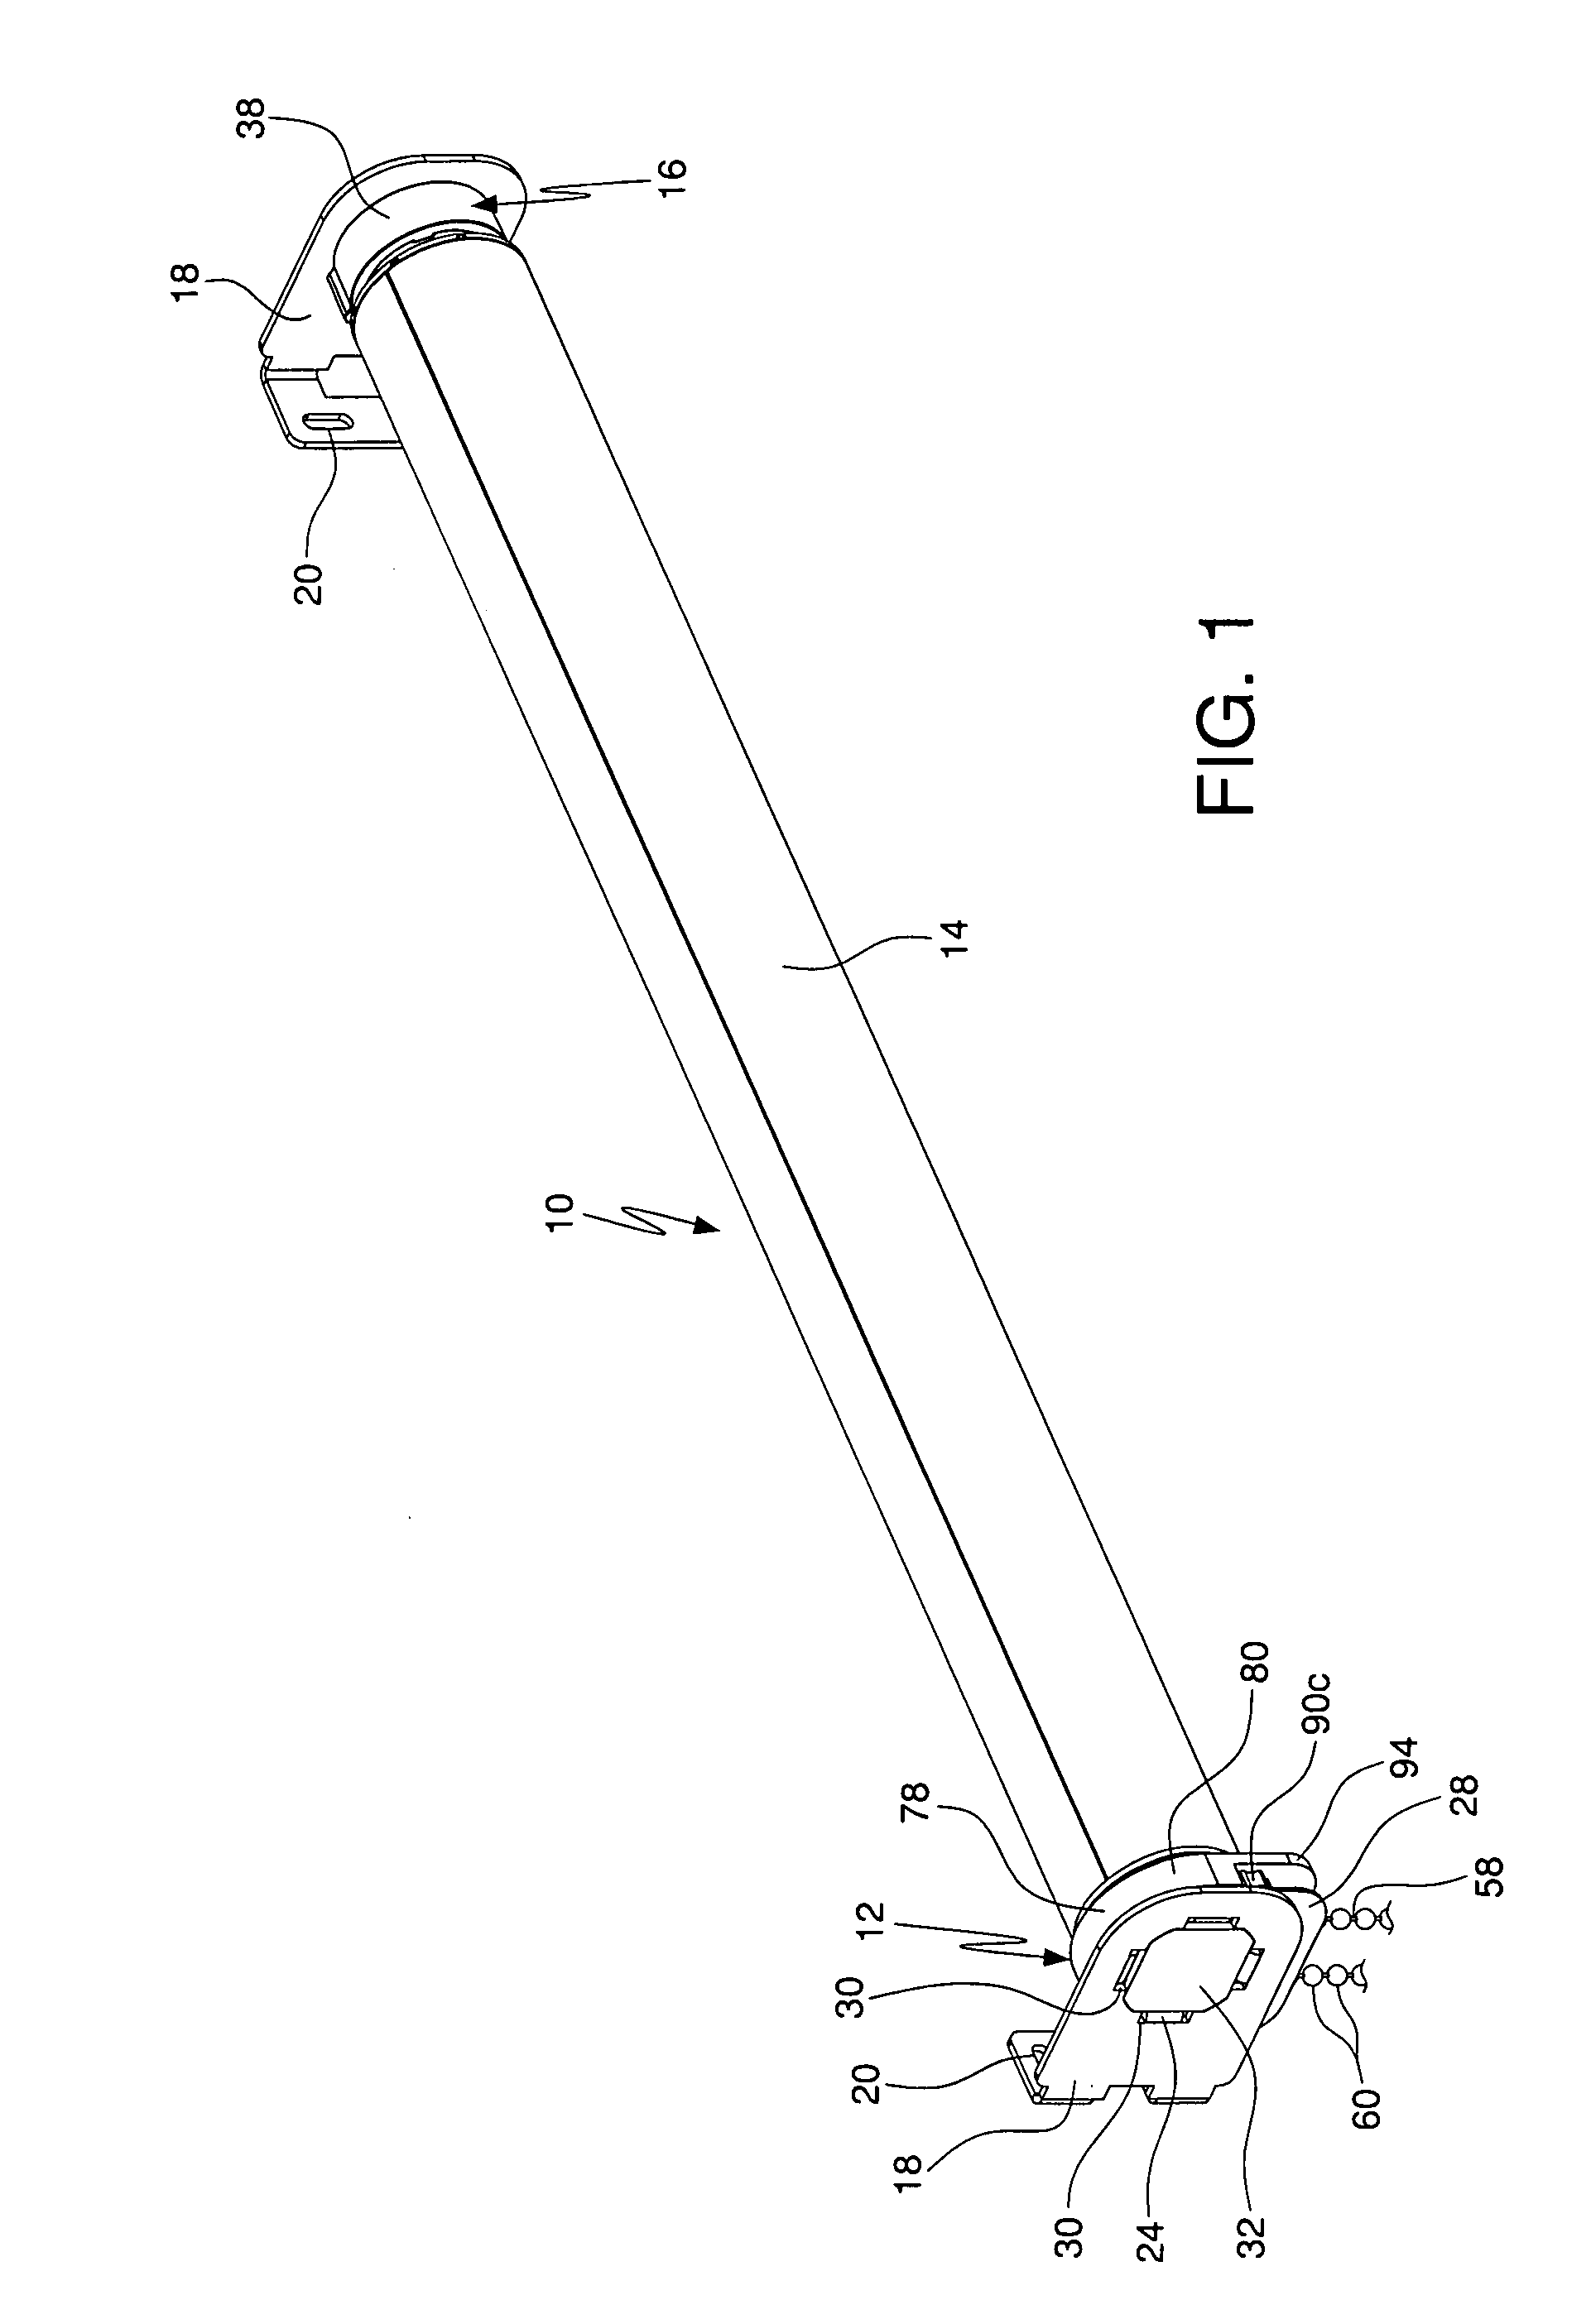 Manual roller shade having clutch mechanism, chain guide and universal mounting